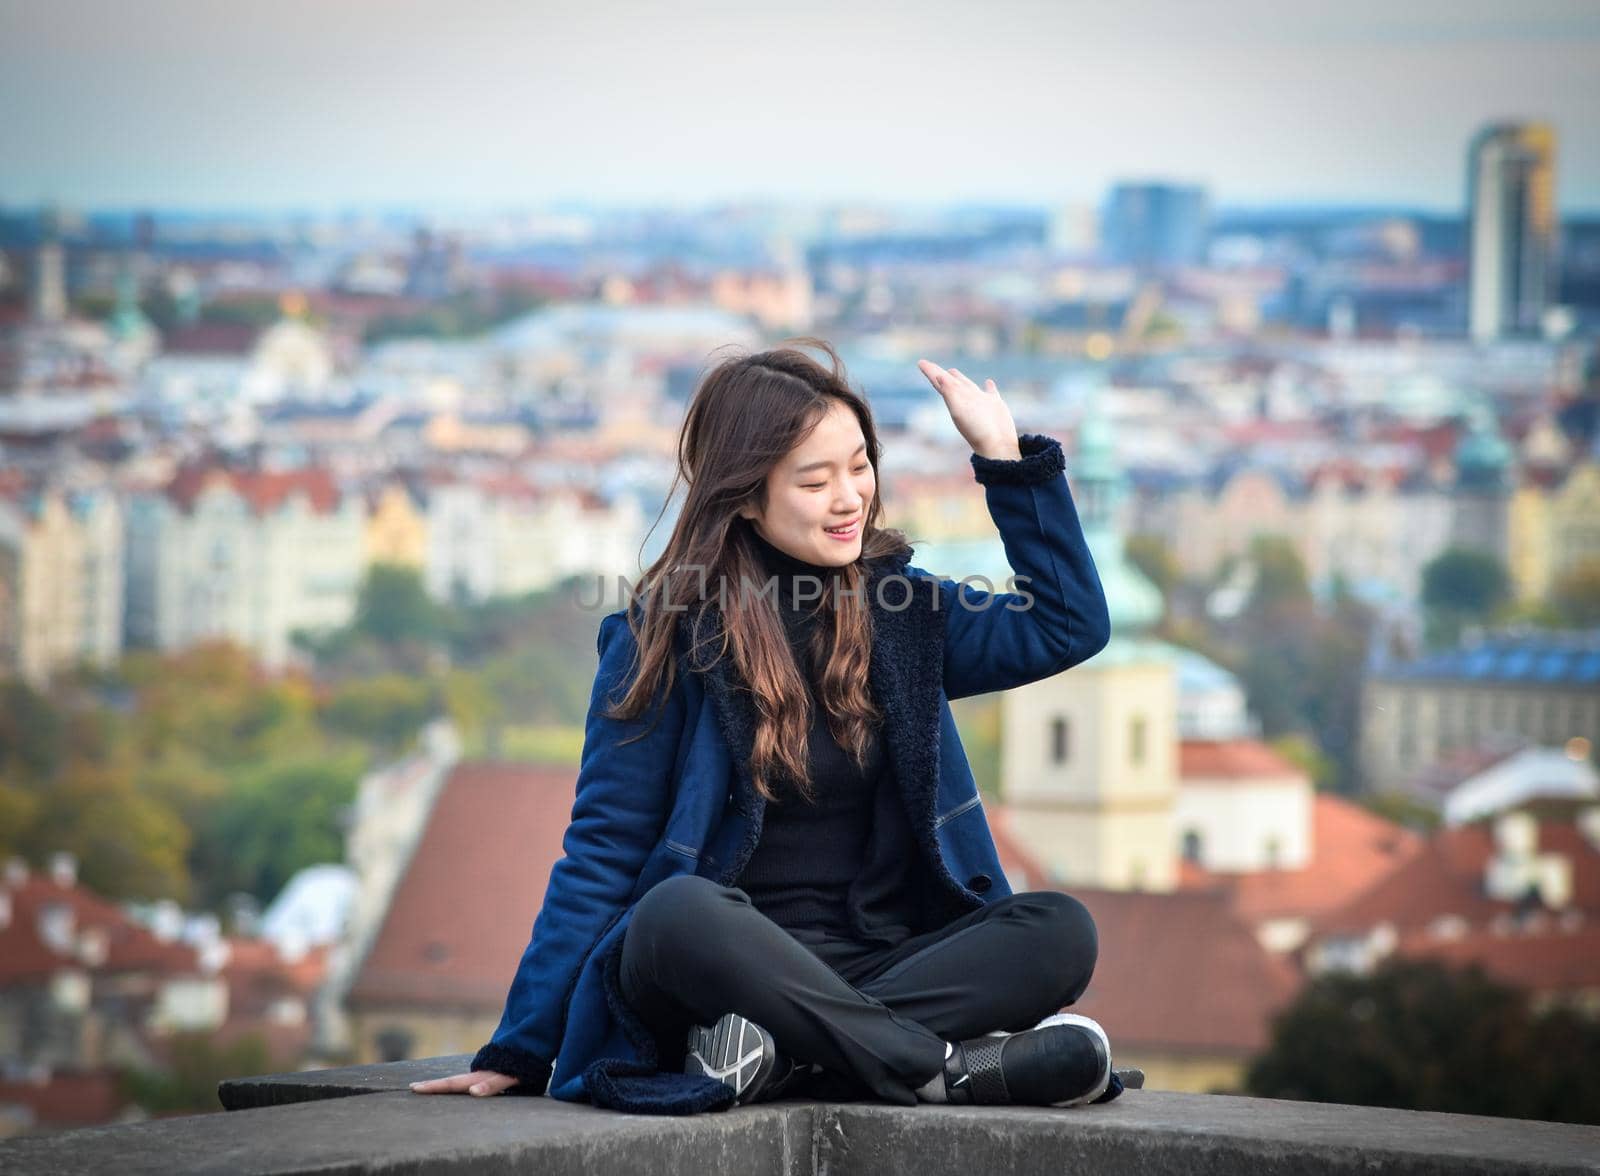 Prague, Czech Republic - October 10, 2017: Pretty girl poses and looks at the old city of Prague from observation decks near Prague Castle, Prague Czech Republic